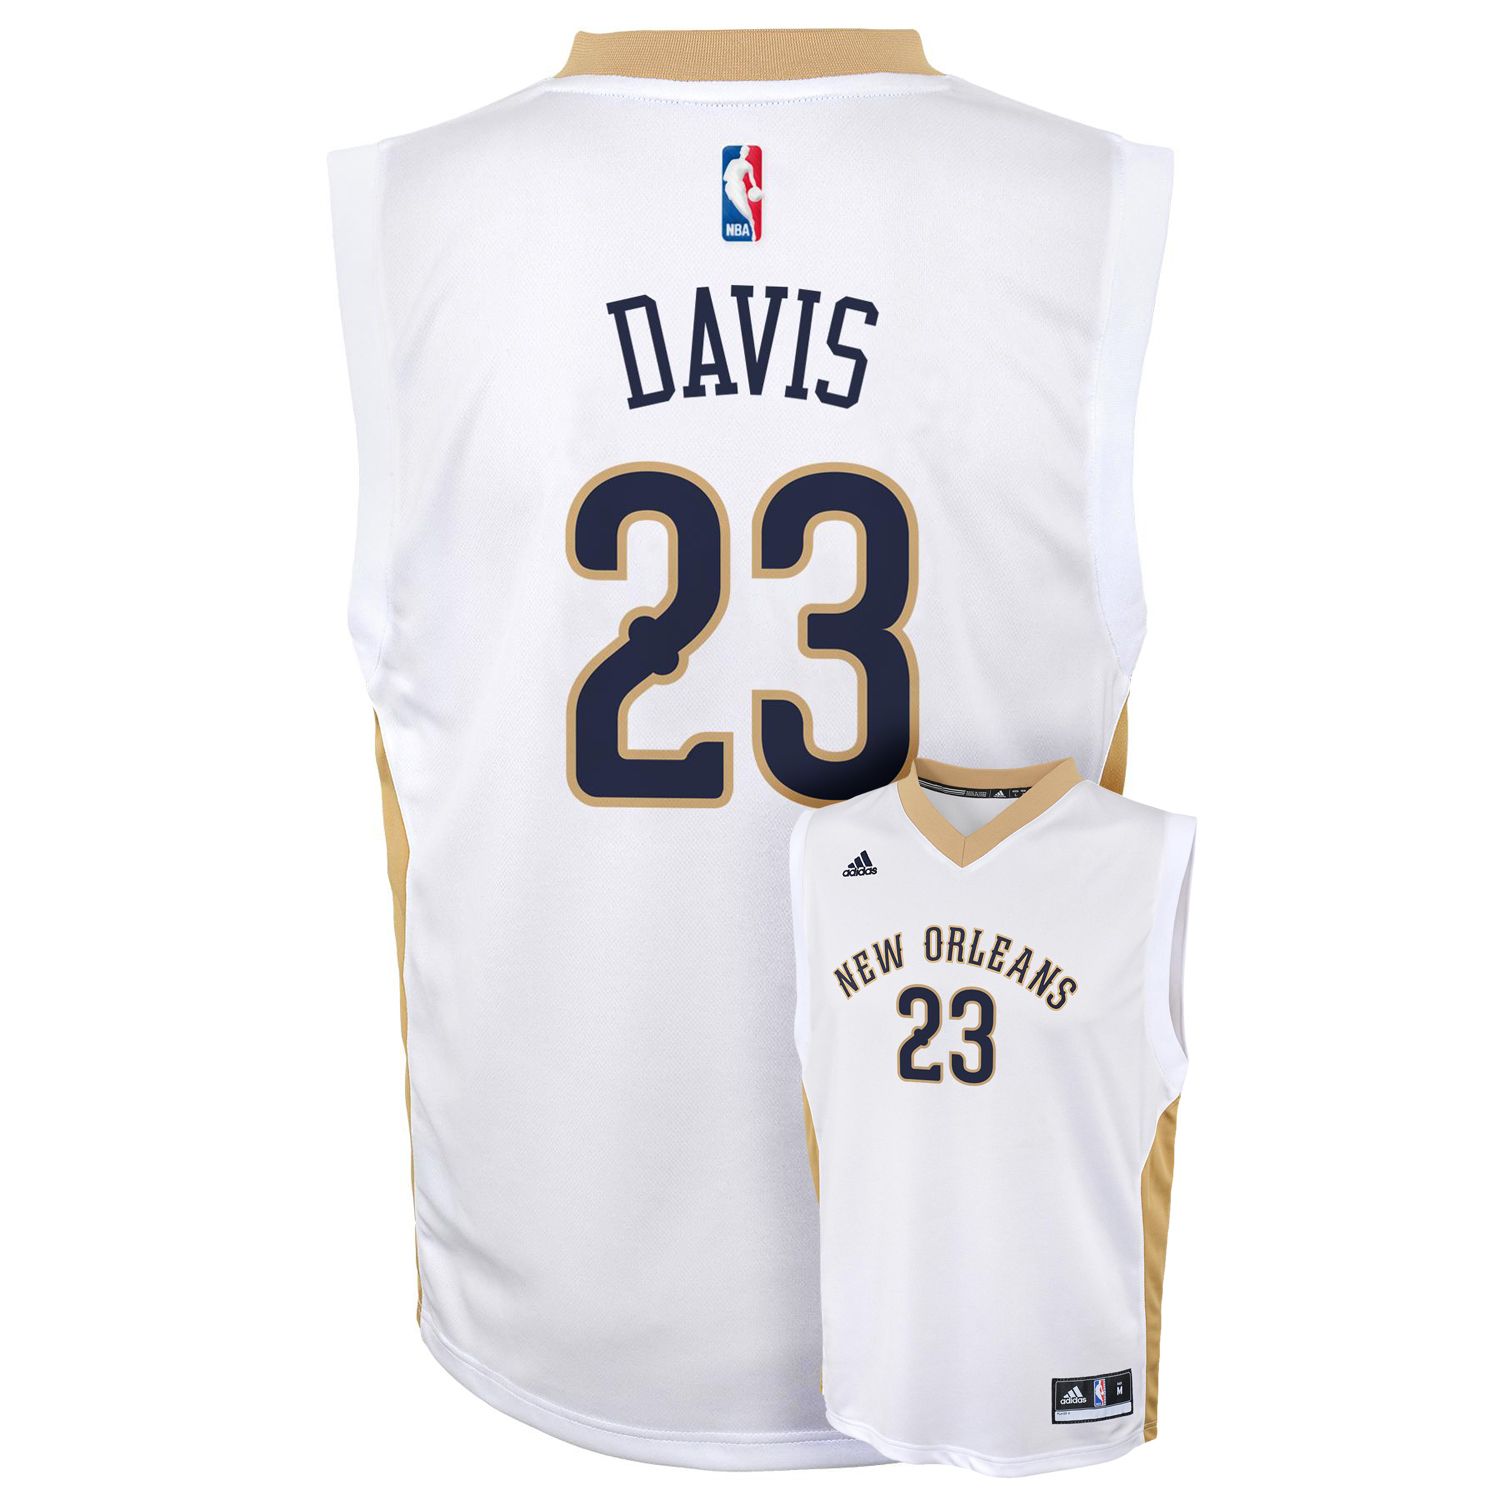 new orleans pelicans anthony davis jersey